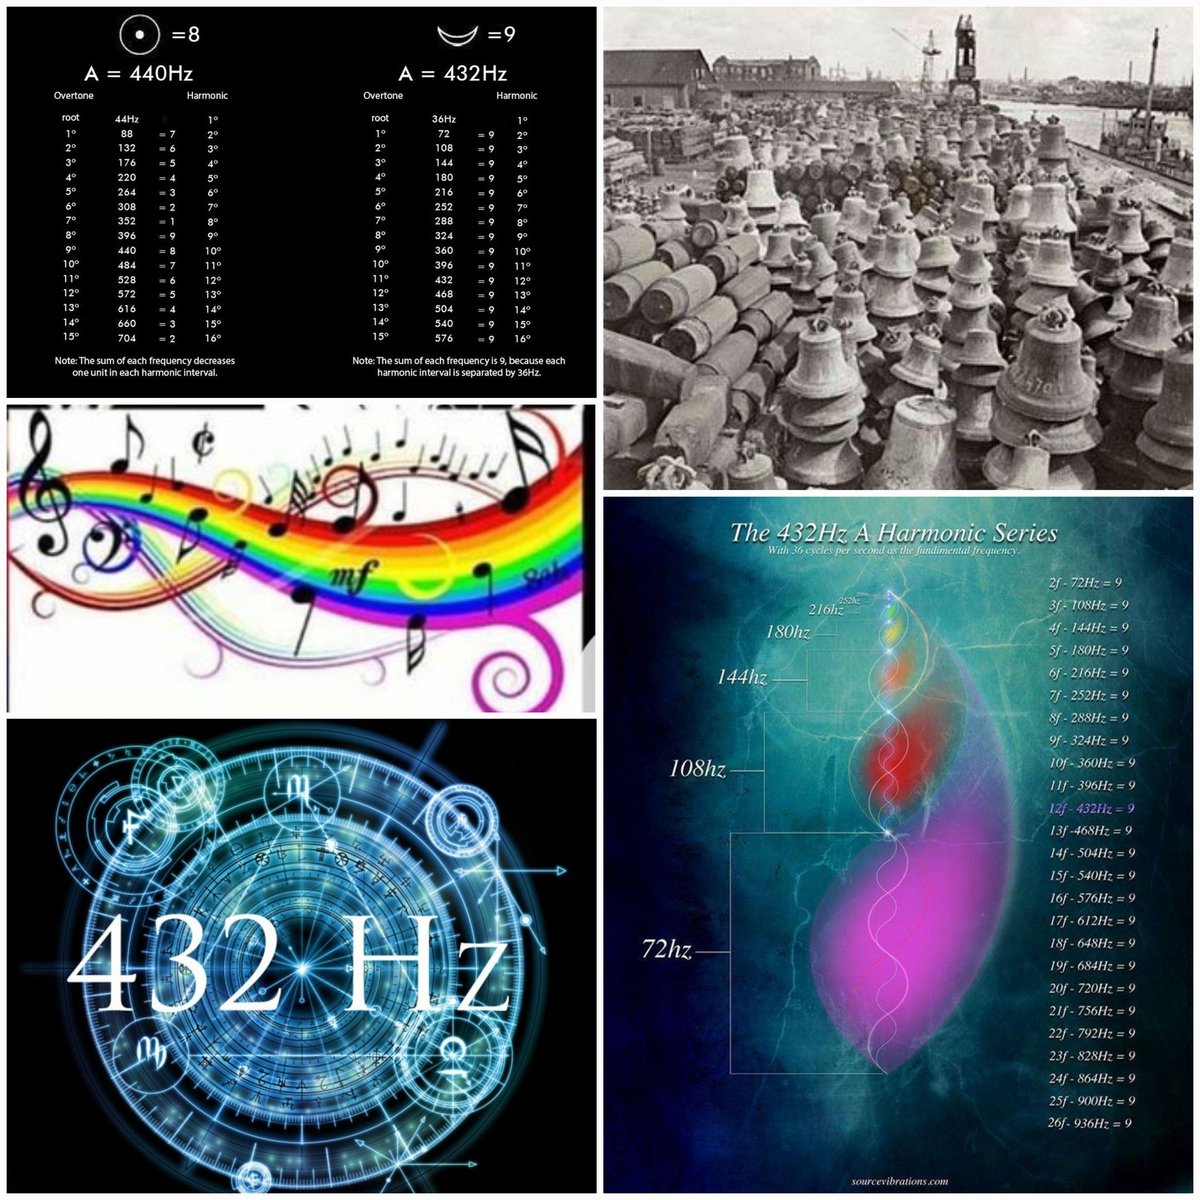 In 1939, prior to the Organization for Standardization (ISO) promoting its change in 1953. 'Goebbels' announced the change of MUSIC being tuned from 432Hz to 440Hz...
Interestingly, this was the same time the BELLS were removed to be turned into WEAPONS against us - from healing…